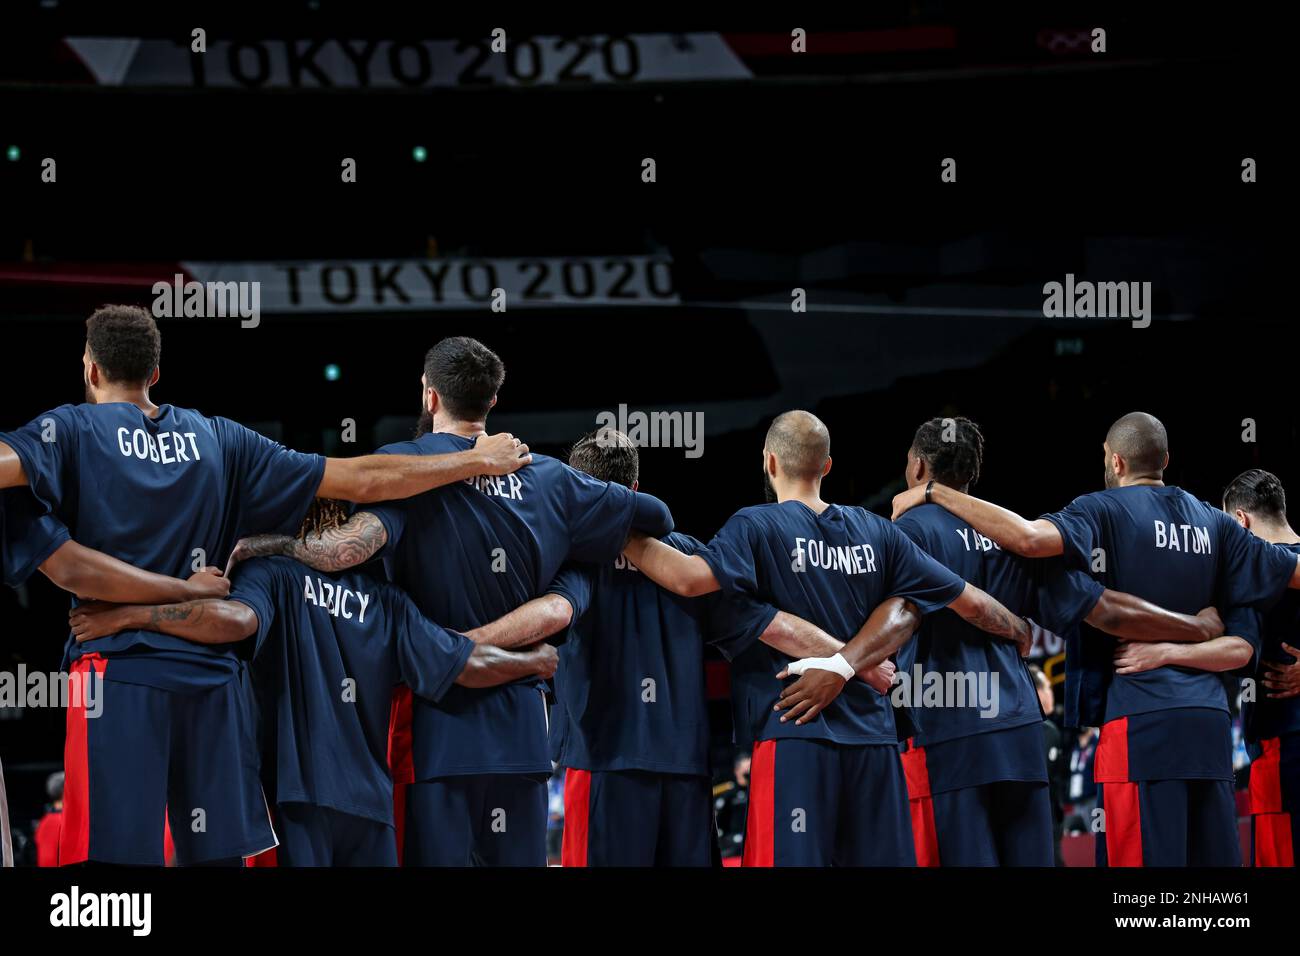 AUG 7, 2021: Team FRANCE in the Men's Basketball Final between USA and France at the Tokyo 2020 Olympic Games (Photo by Mickael Chavet/RX) Stock Photo